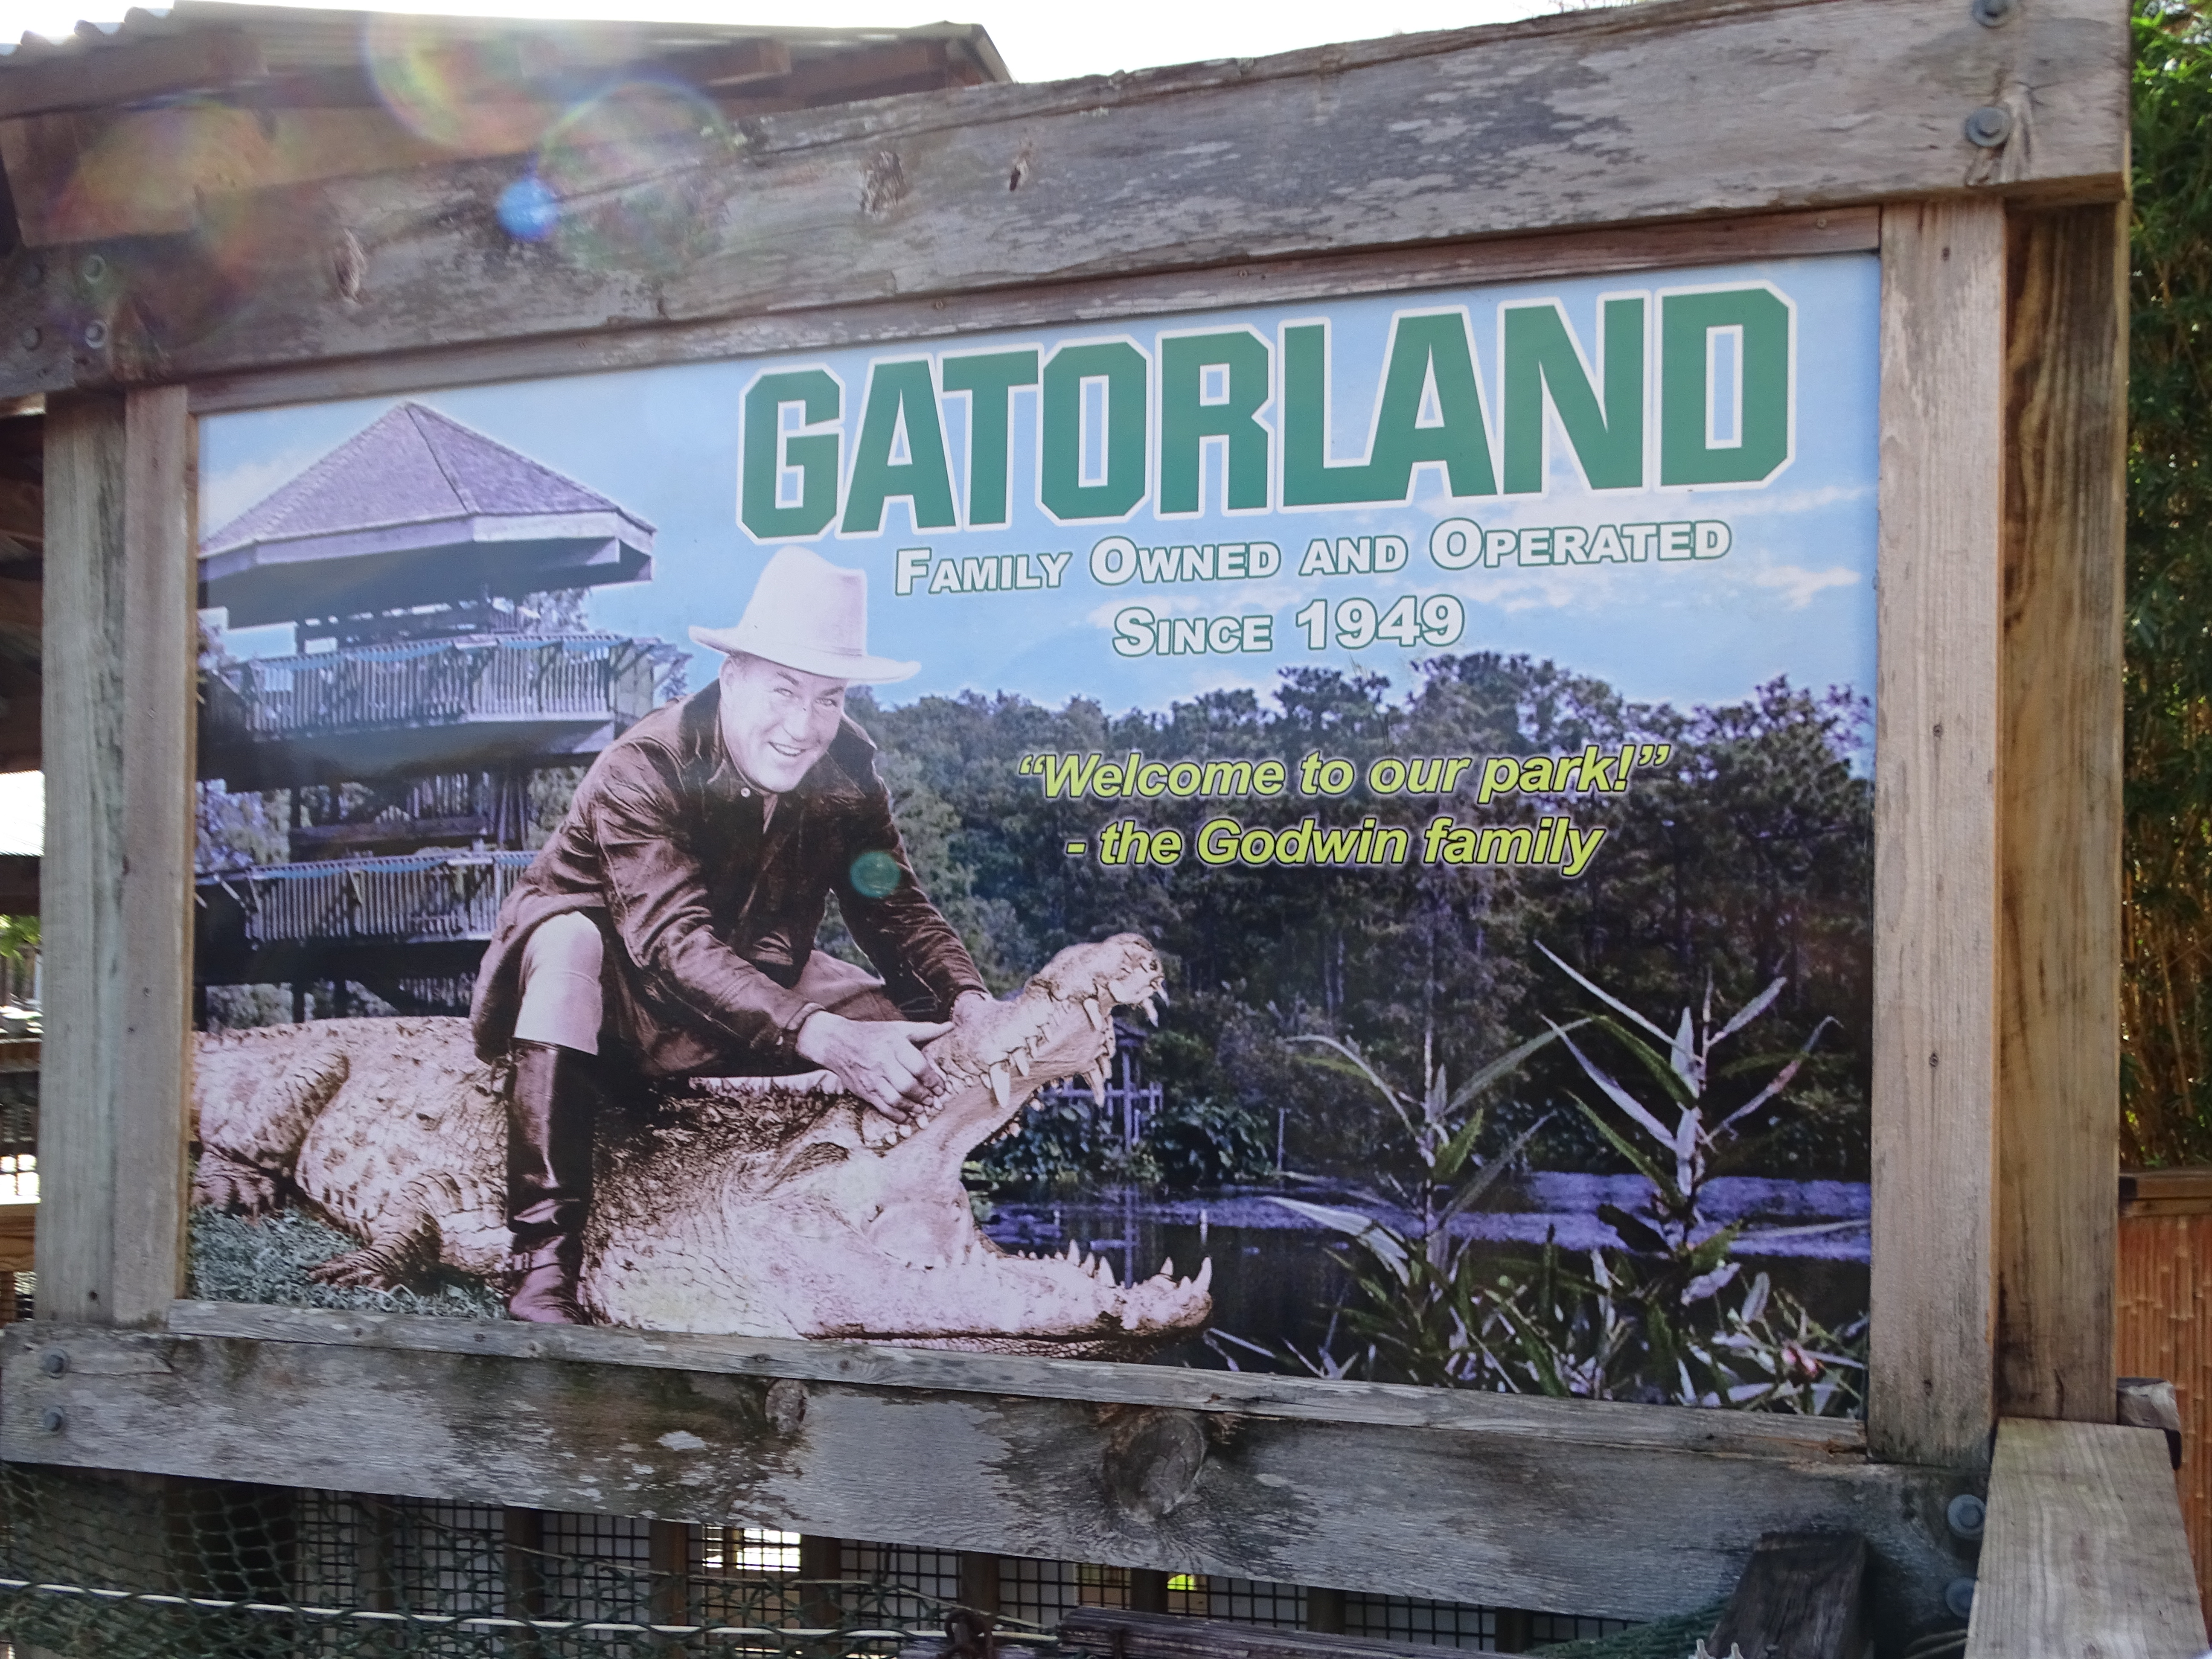 Visiting Orlando Florida and want something to do besides Disney? Gatorland is an alligator paradise. With 110 acres, this animal refuge is a fun packed day.